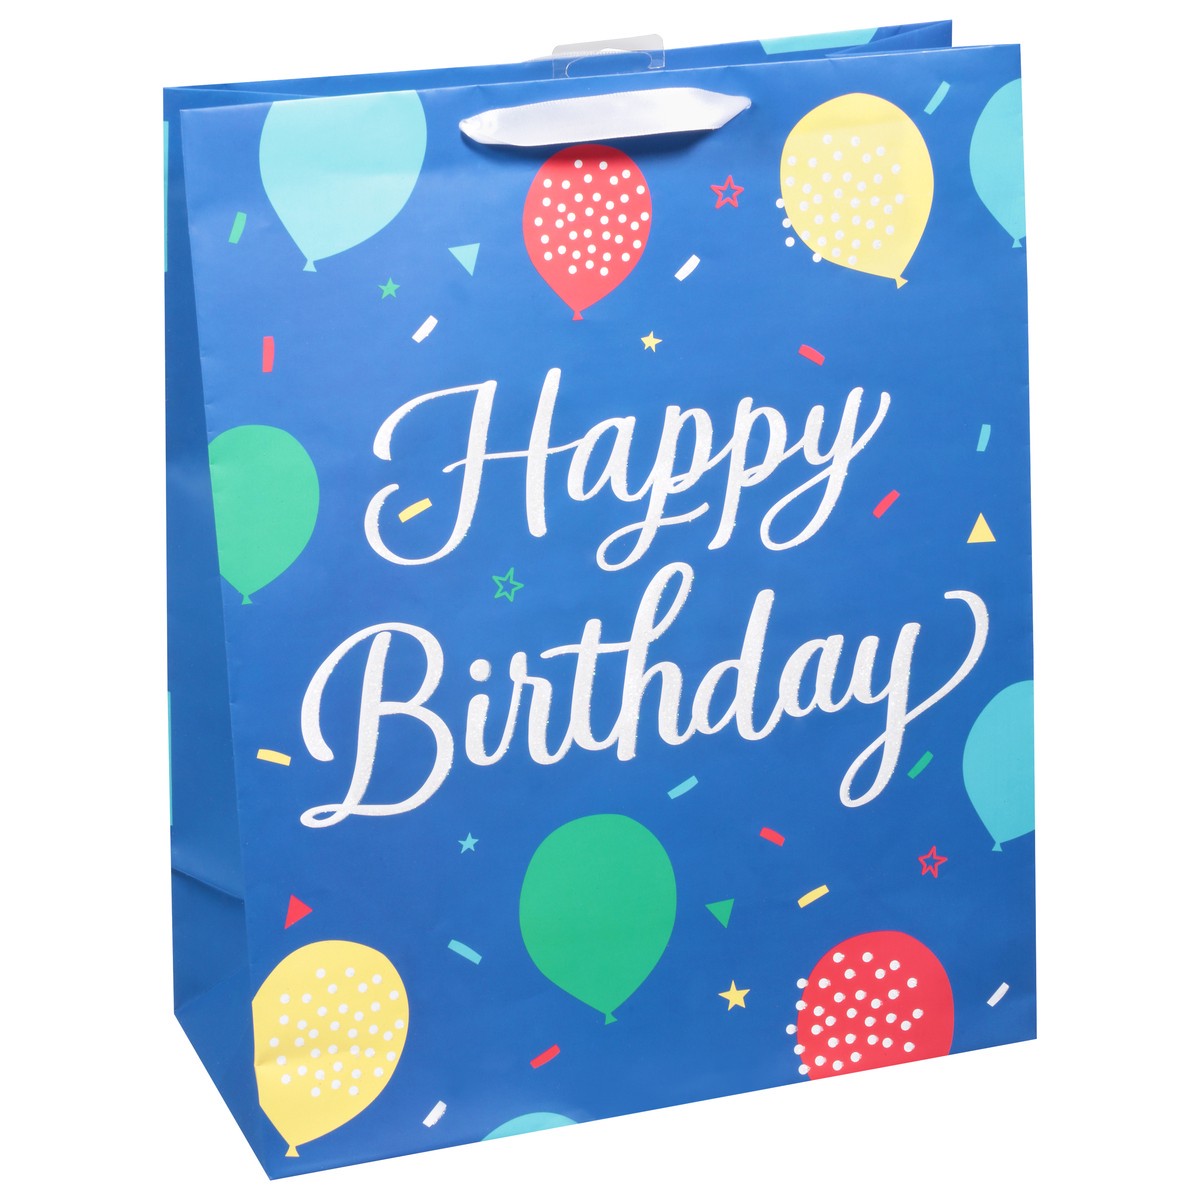 slide 5 of 9, American Greetings Give them extra smiles with an extra large gift bag. This design features “Happy Birthday” written in white script against a blue background with colorful balloons. Accents of crystalline add some sparkle and shine. This gift bag is the ideal size for giving large toys, clothing, blankets, electronics, or any oversized gift. Simply add some tissue paper (sold separately) to finish the look, and you're ready to make someone's day so much brighter., 1 ct